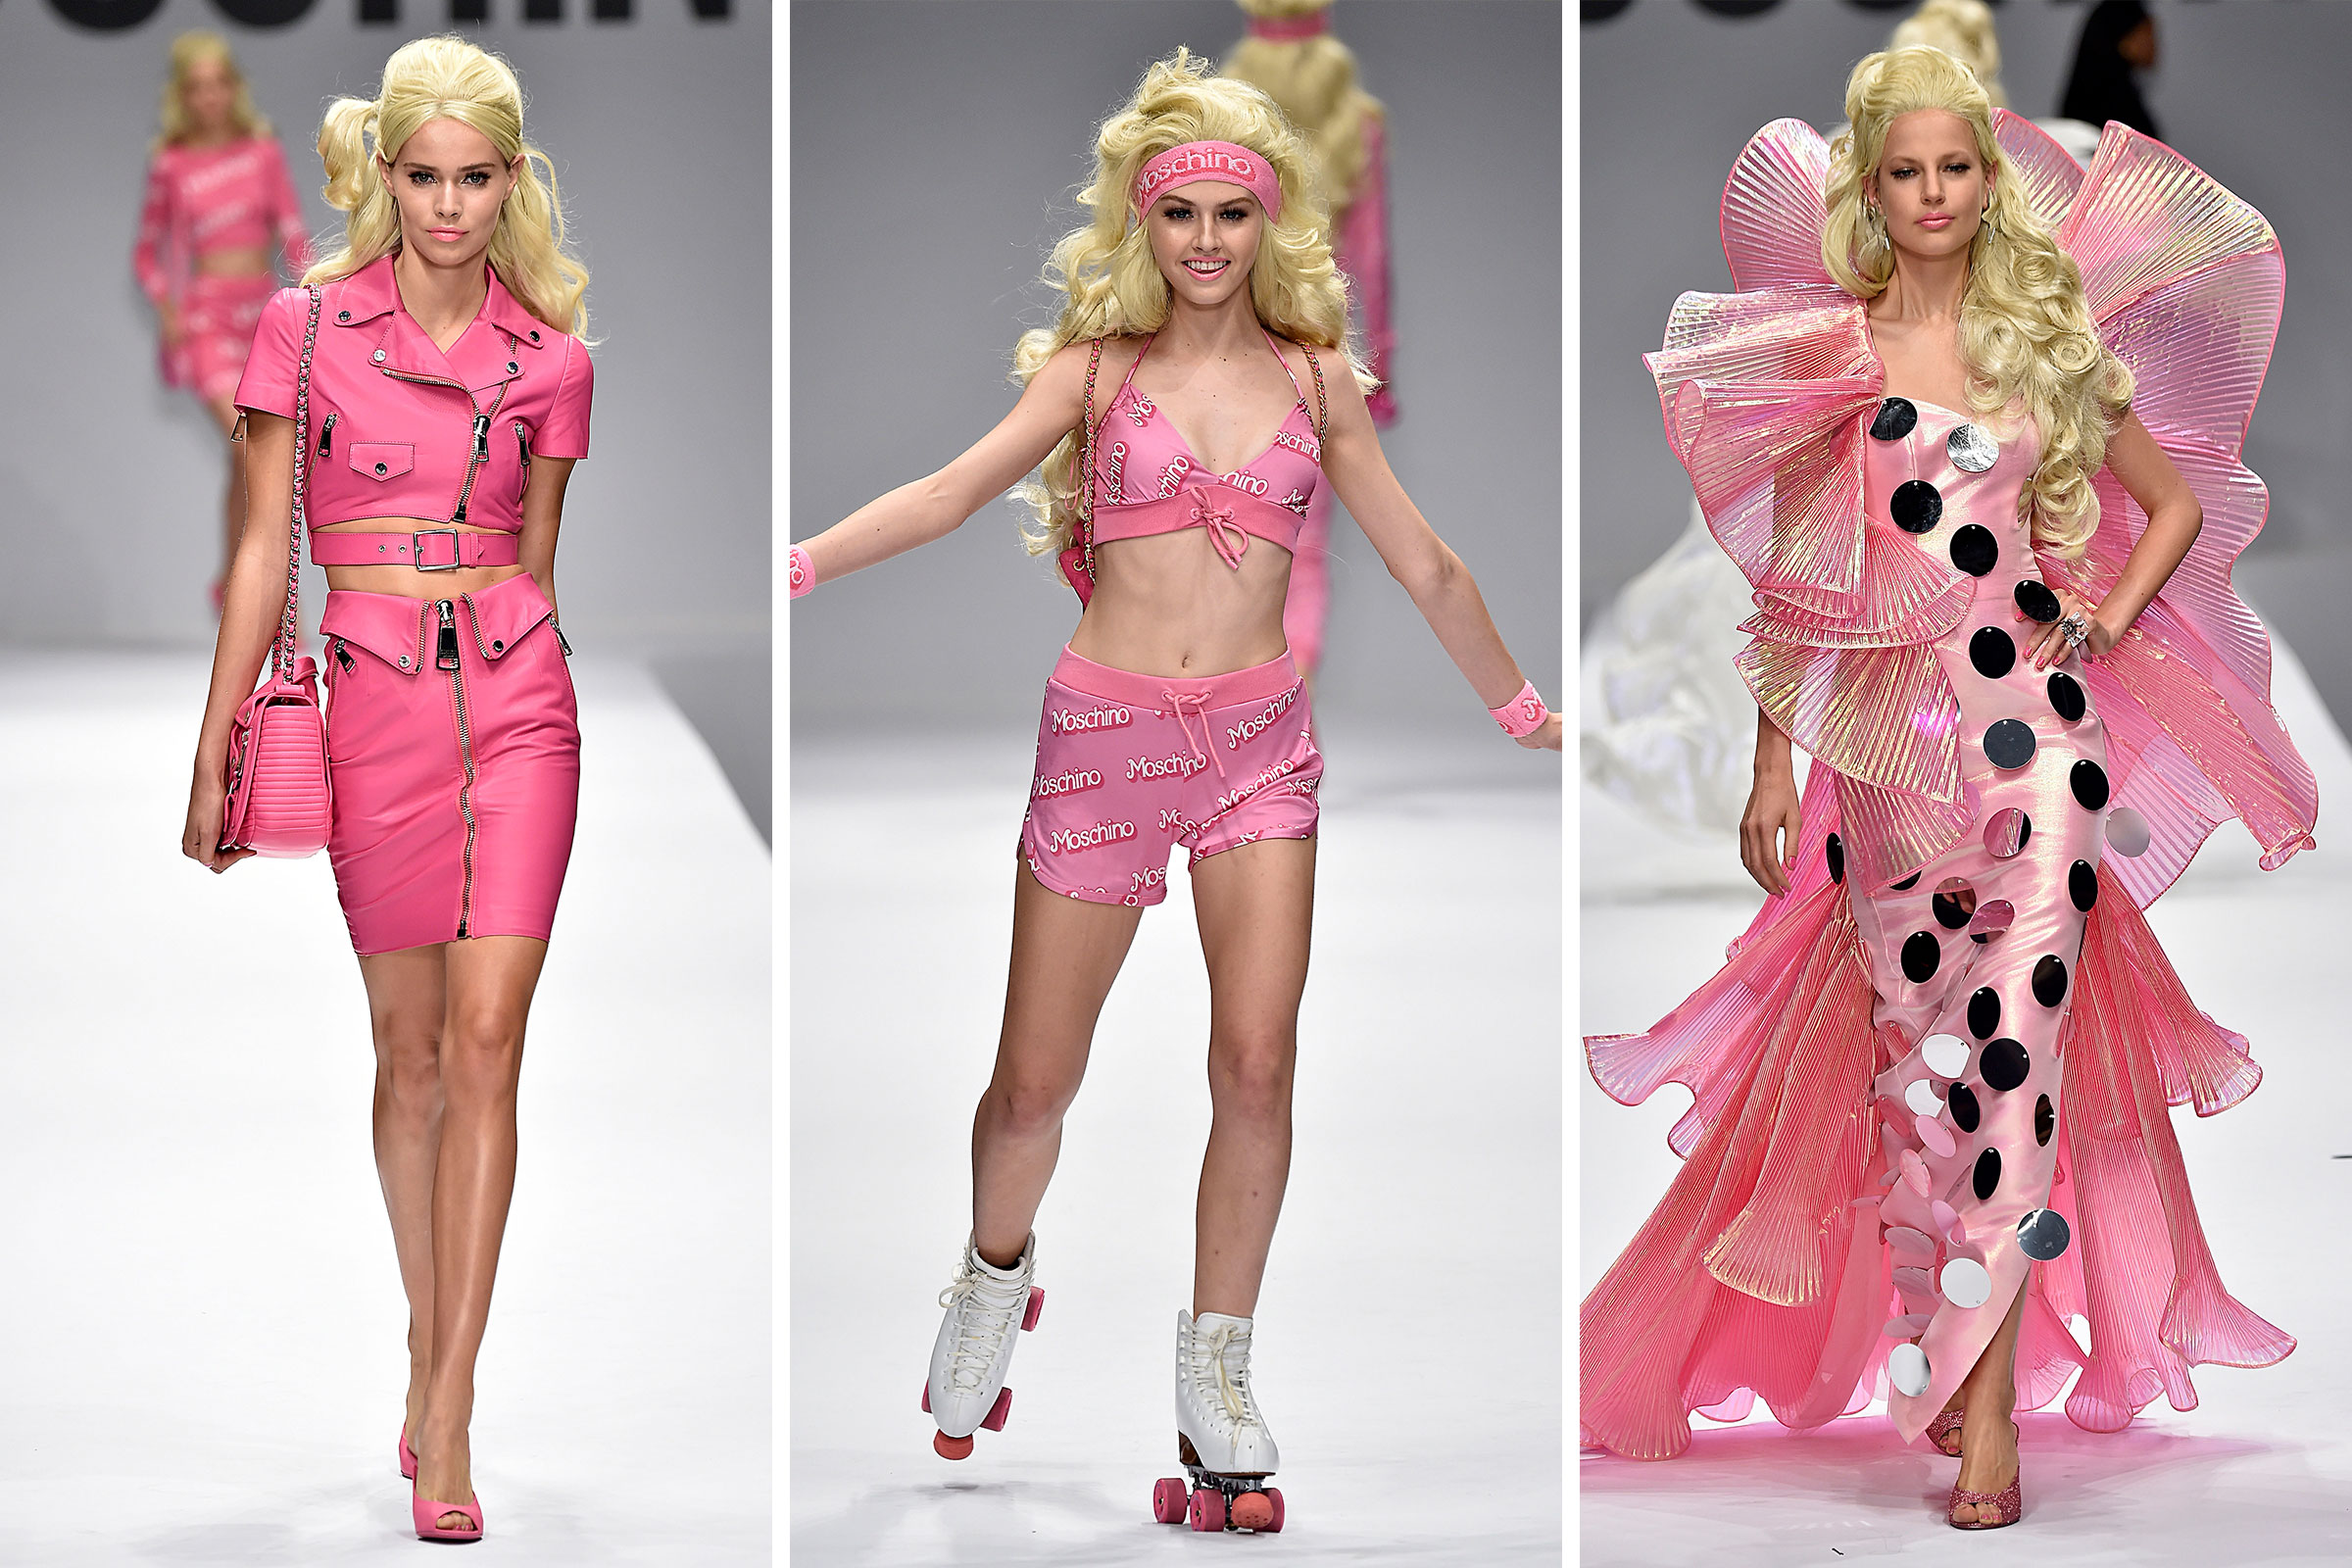 This Brand-New Moschino Barbie Puts All Your Old American Girl Dolls t